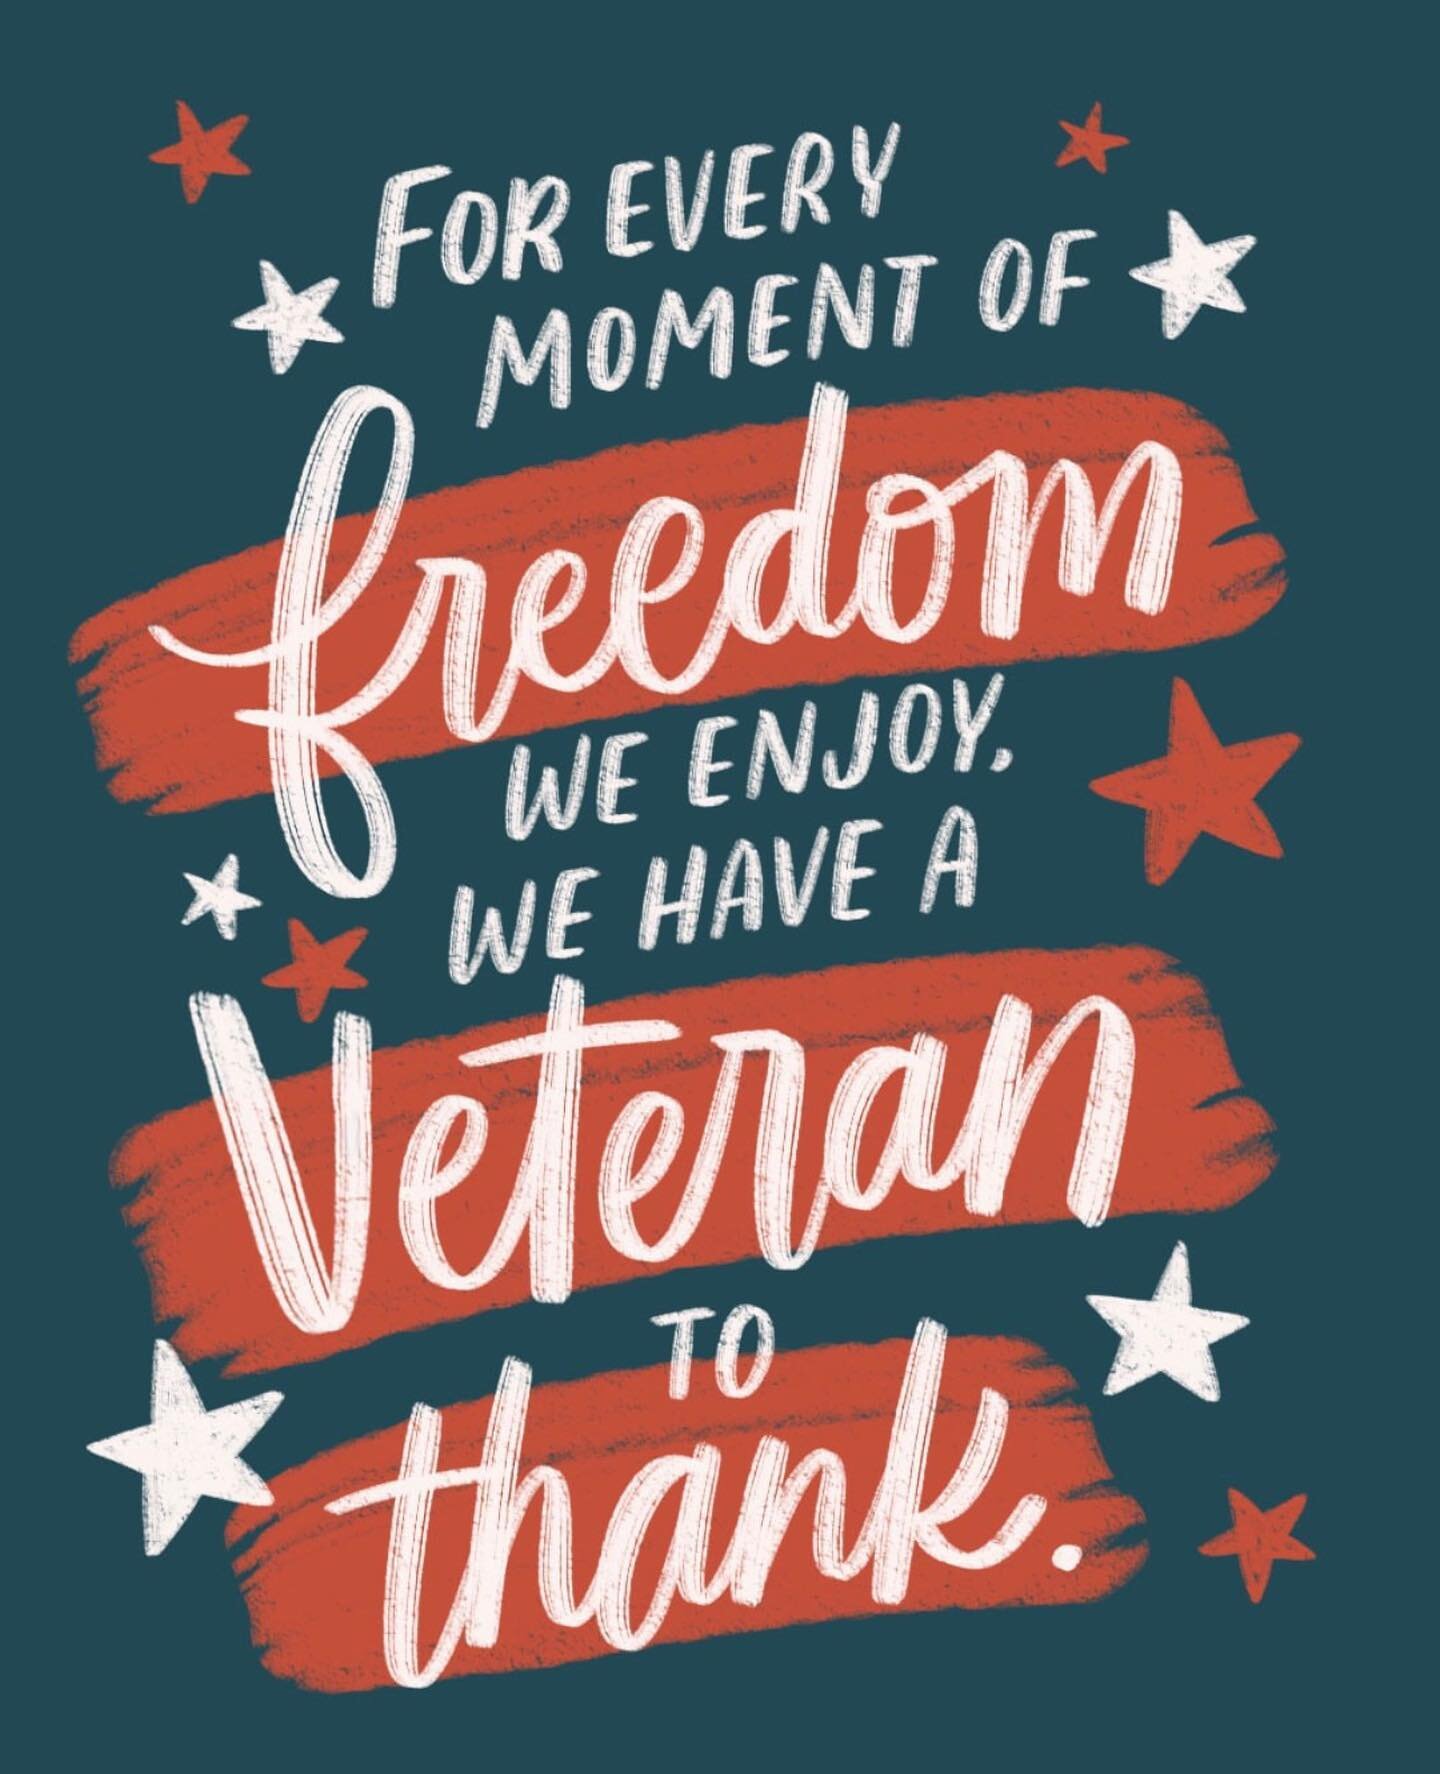 To those in uniform serving today and who have served in the past, we honor you today and everyday! Happy Veterans Day! Tag a veteran you&rsquo;re thankful for &hearts;️💙&hearts;️💙&hearts;️